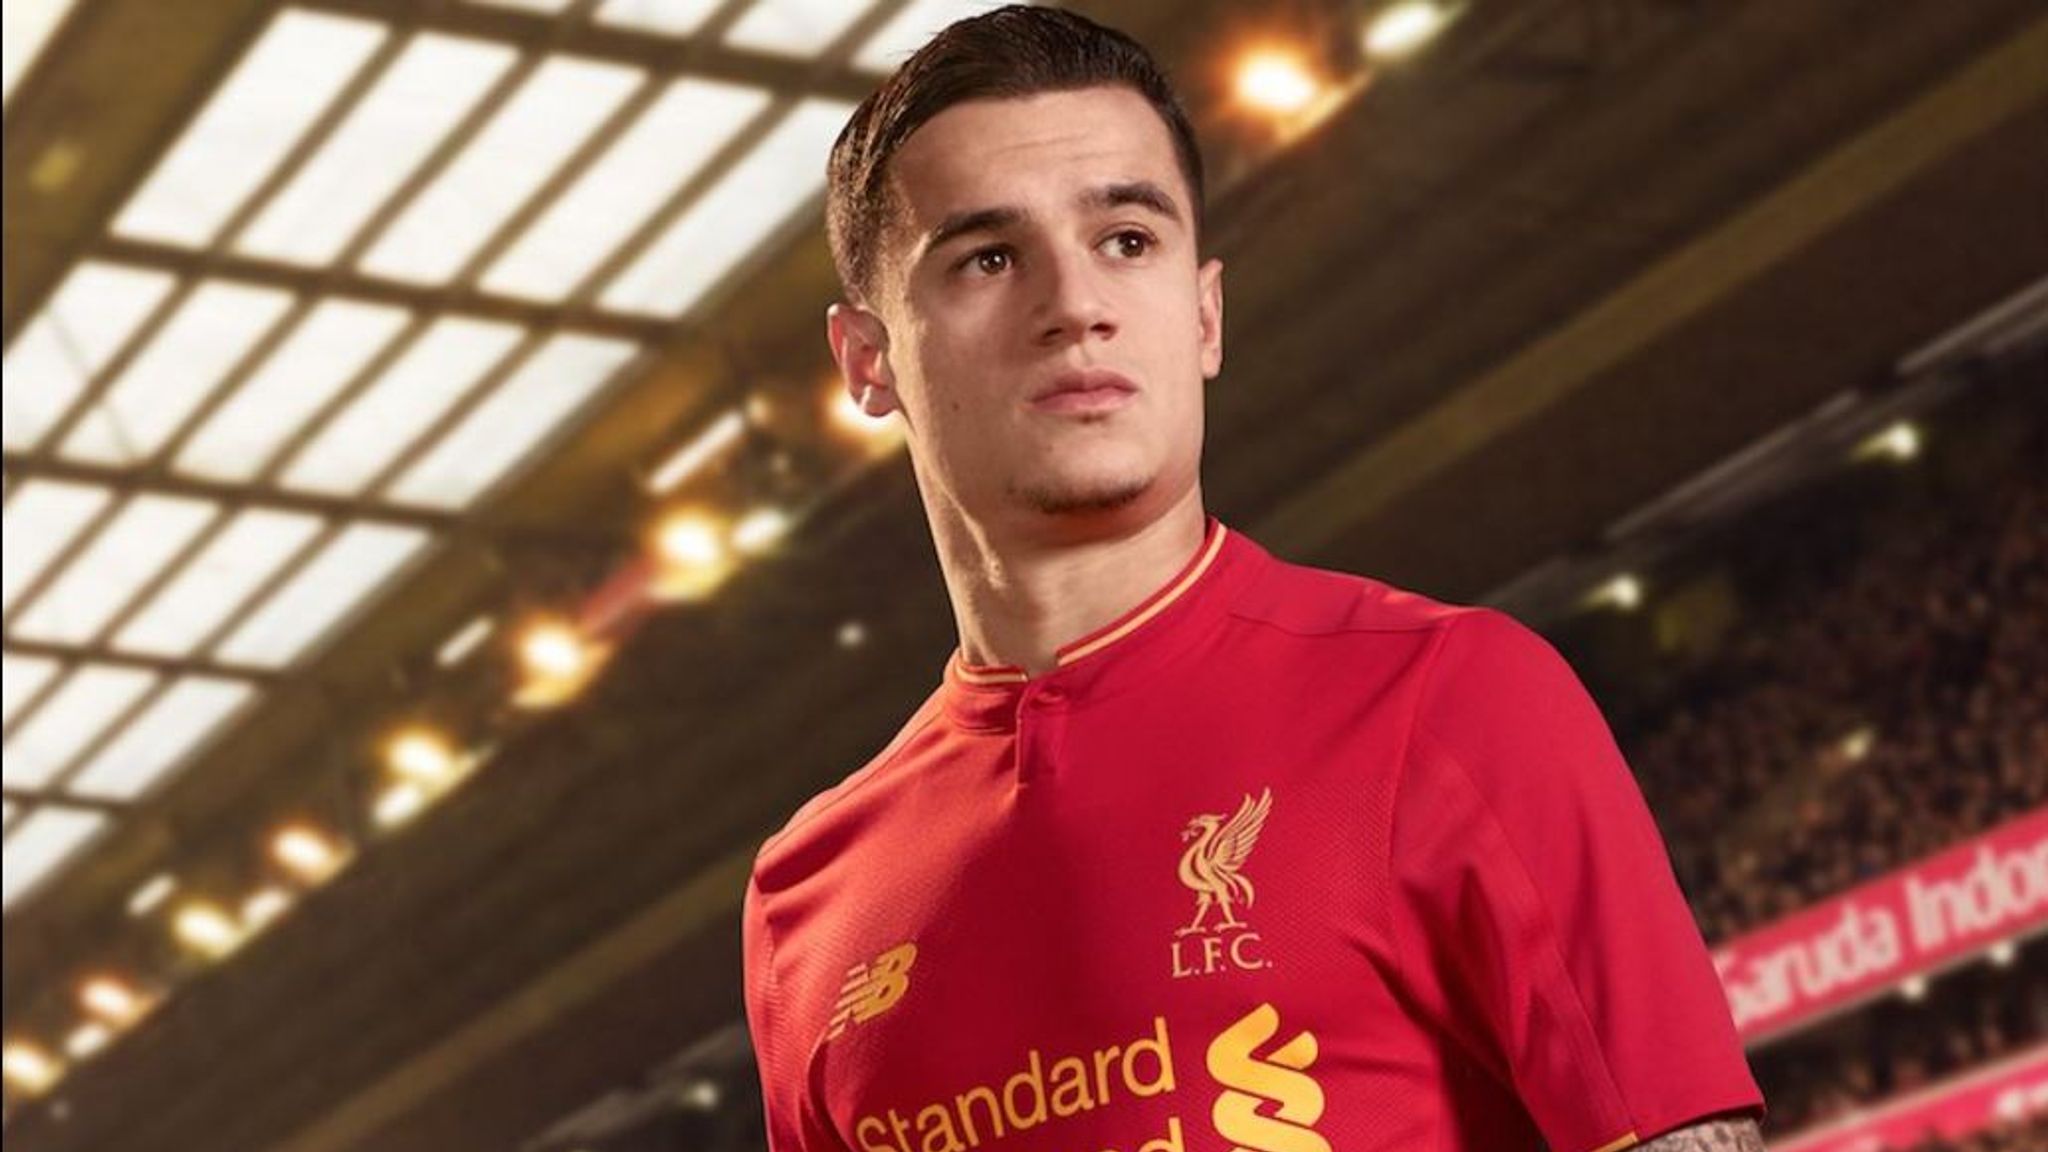 Liverpool unveil new red and gold home strip for 2016-17 season